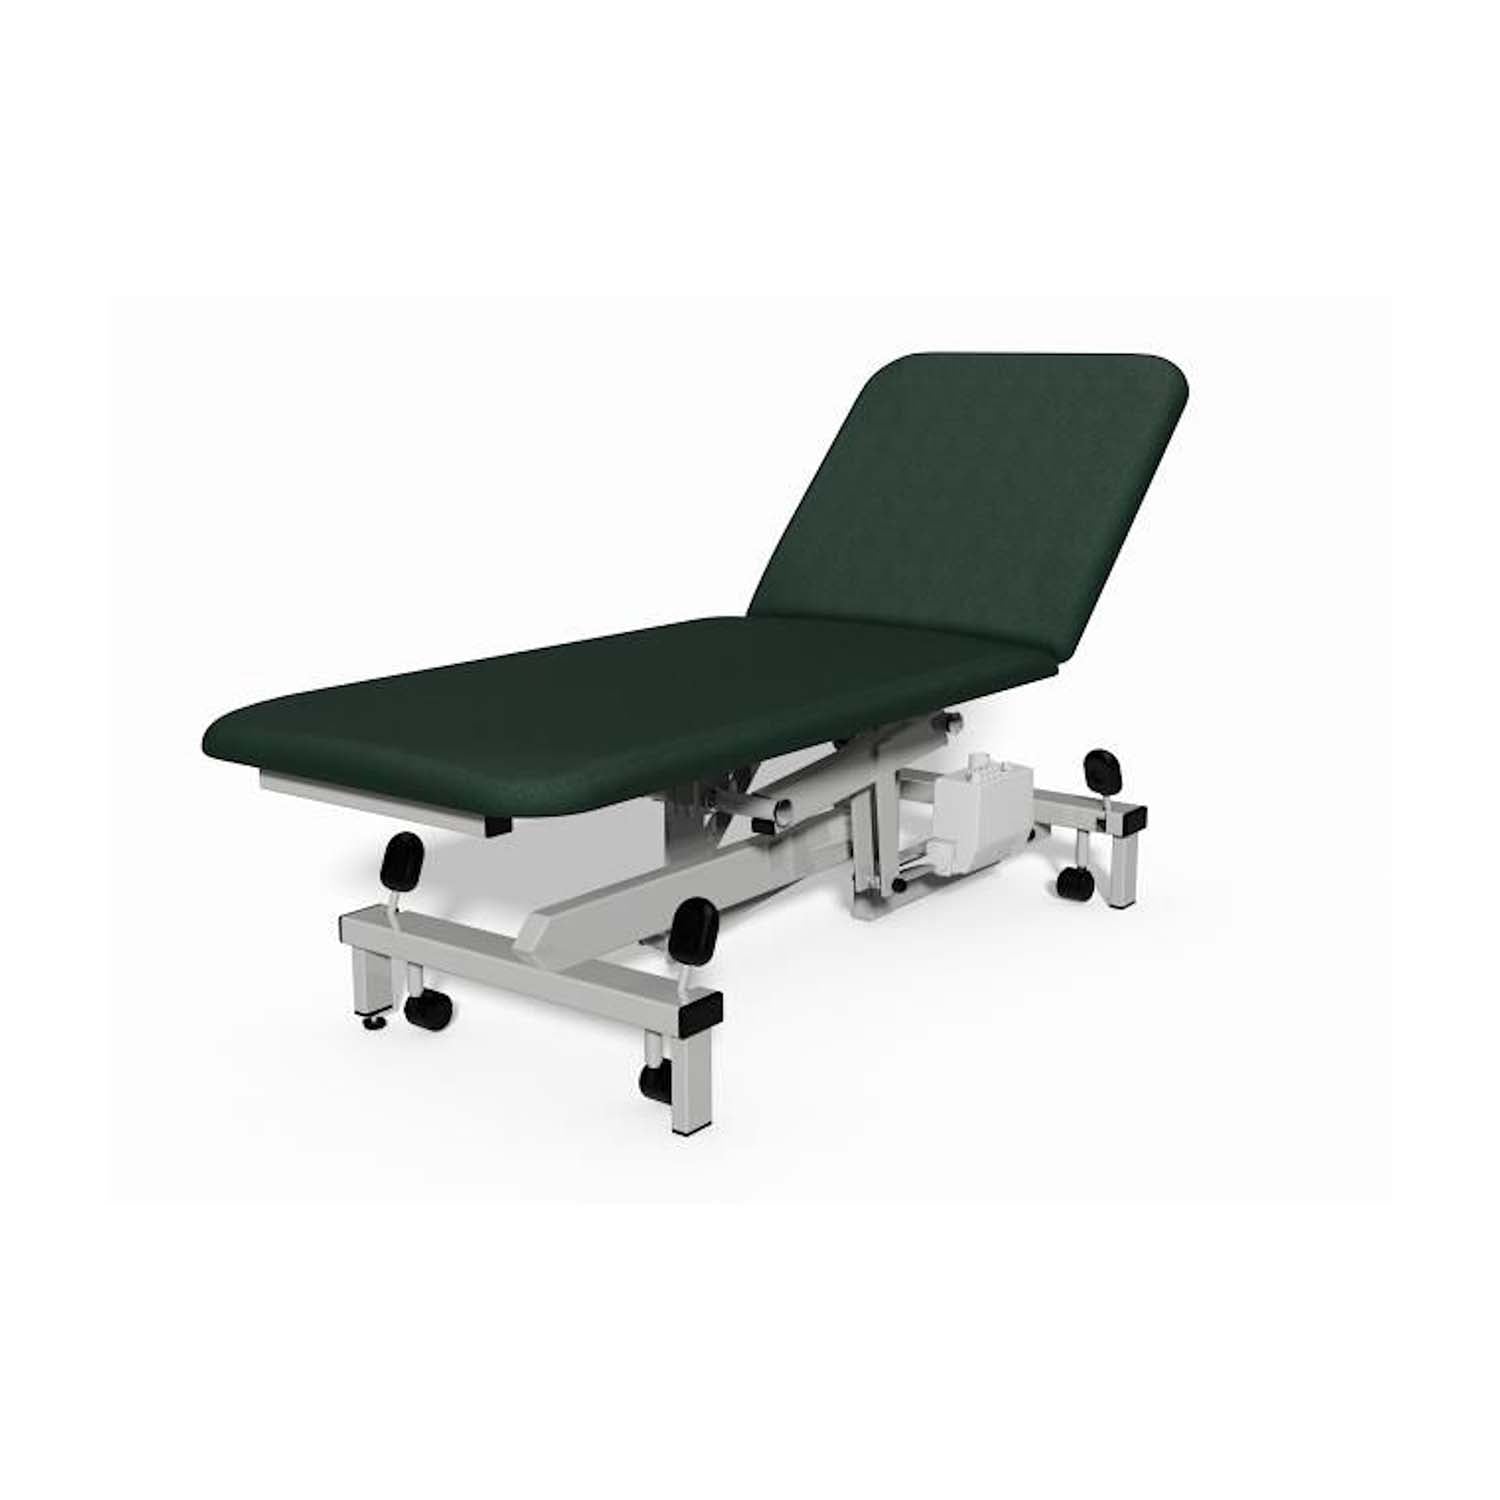 Plinth 2000 Model 502 Examination Couch | Electric | Rainforest